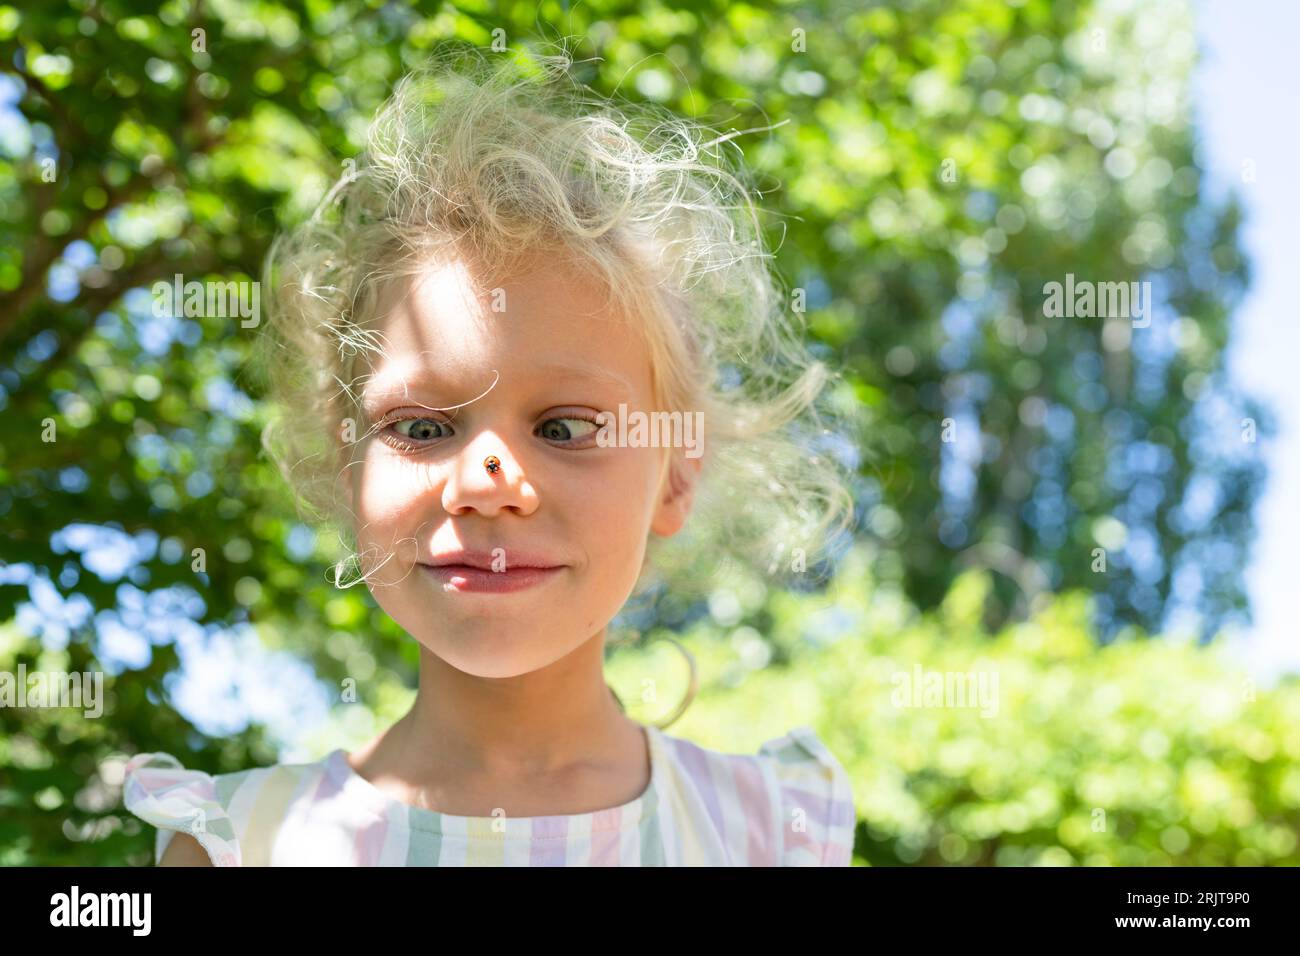 Smiling girl with ladybug on nose in park Stock Photo